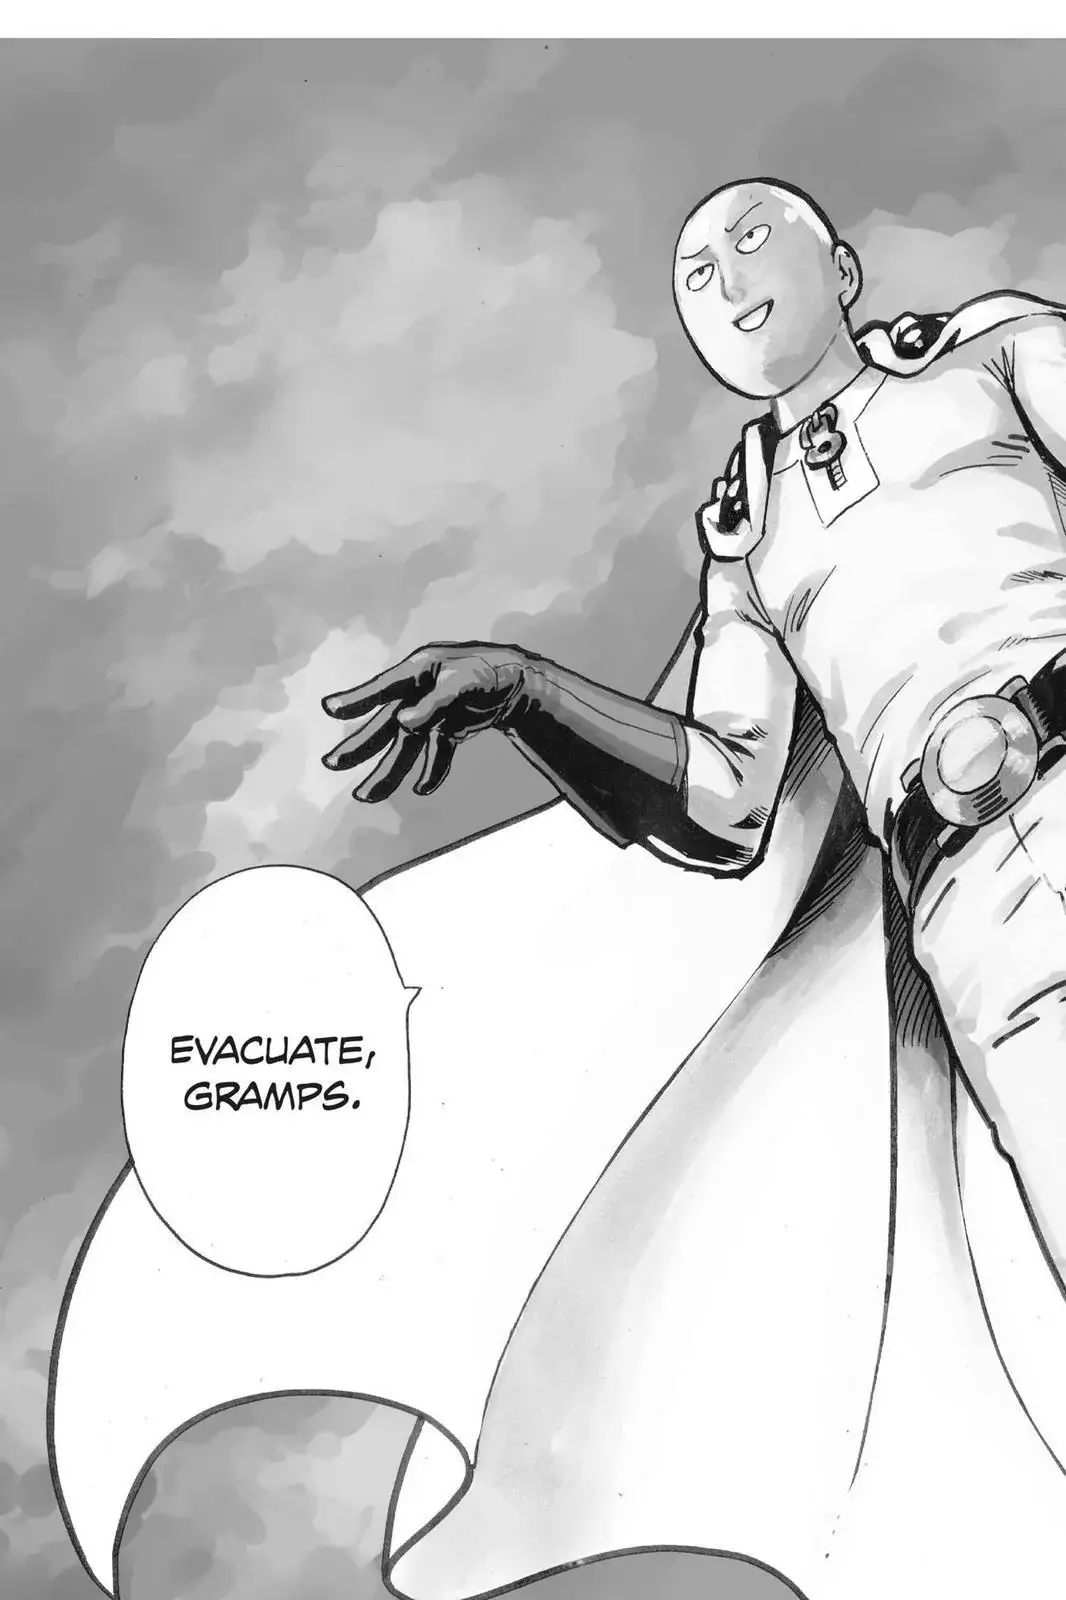 One Punch Man Chapter 21, READ One Punch Man Chapter 21 ONLINE, lost in the cloud genre,lost in the cloud gif,lost in the cloud girl,lost in the cloud goods,lost in the cloud goodreads,lost in the cloud,lost ark cloud gaming,lost odyssey cloud gaming,lost in the cloud fanart,lost in the cloud fanfic,lost in the cloud fandom,lost in the cloud first kiss,lost in the cloud font,lost in the cloud ending,lost in the cloud episode 97,lost in the cloud edit,lost in the cloud explained,lost in the cloud dog,lost in the cloud discord server,lost in the cloud desktop wallpaper,lost in the cloud drawing,can't find my cloud on network,lost in the cloud characters,lost in the cloud chapter 93 release date,lost in the cloud birthday,lost in the cloud birthday art,lost in the cloud background,lost in the cloud banner,lost in the clouds meaning,what is the black cloud in lost,lost in the cloud ao3,lost in the cloud anime,lost in the cloud art,lost in the cloud author twitter,lost in the cloud author instagram,lost in the cloud artist,lost in the cloud acrylic stand,lost in the cloud artist twitter,lost in the cloud art style,lost in the cloud analysis